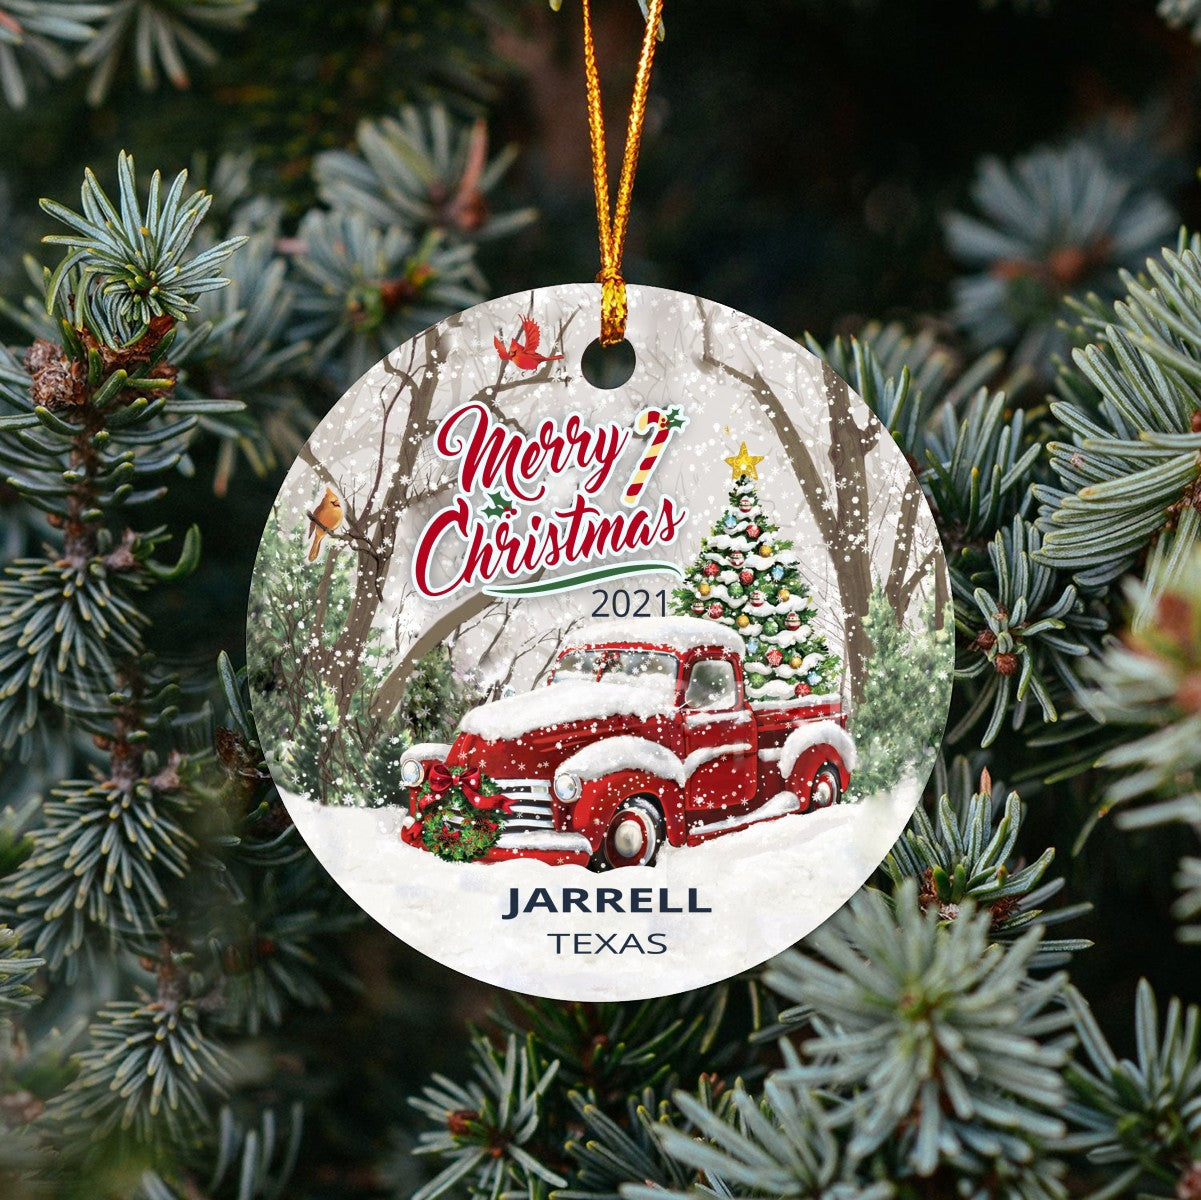 Christmas Tree Ornaments Jarrell - Ornament With Name City, State Jarrell Texas TX Ornament - Red Truck Xmas Ornaments 3'' Plastic Gift For Family, Friend And Housewarming